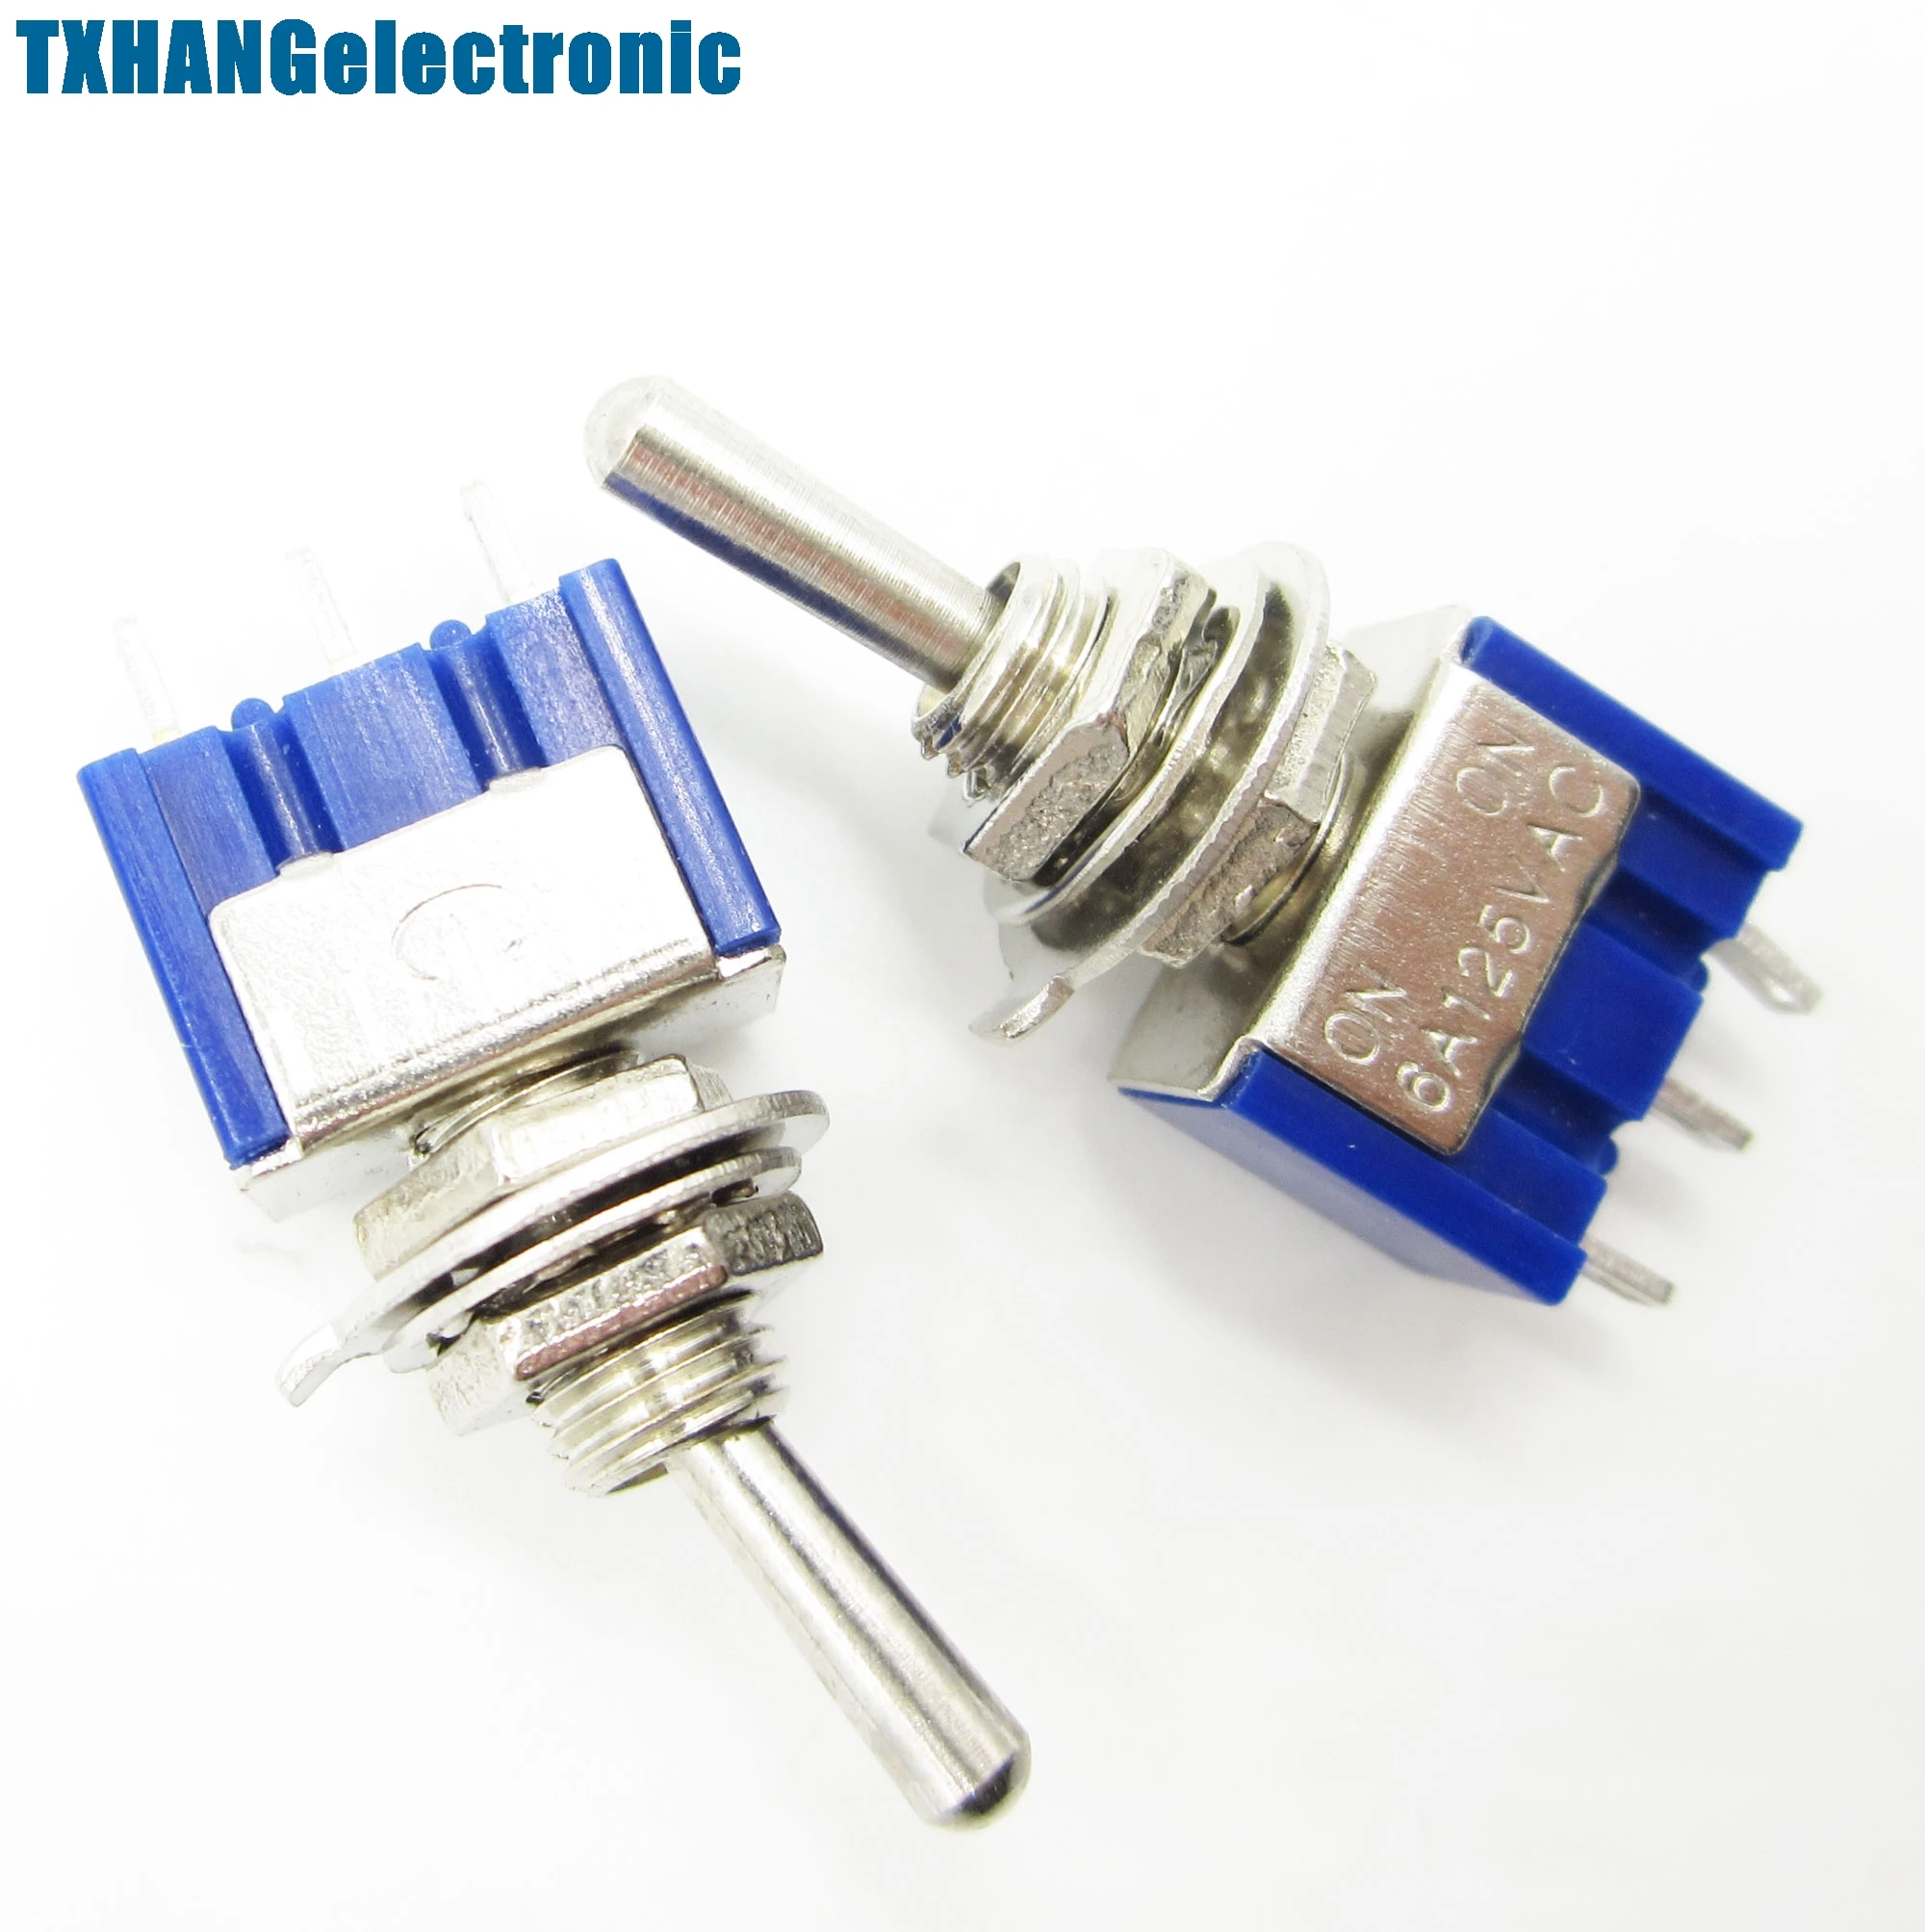 

5PCS Mini 6A 125VAC SPDT MTS-102 3 Pin 2 Position On-on Toggle Switches Practic switch mts-102